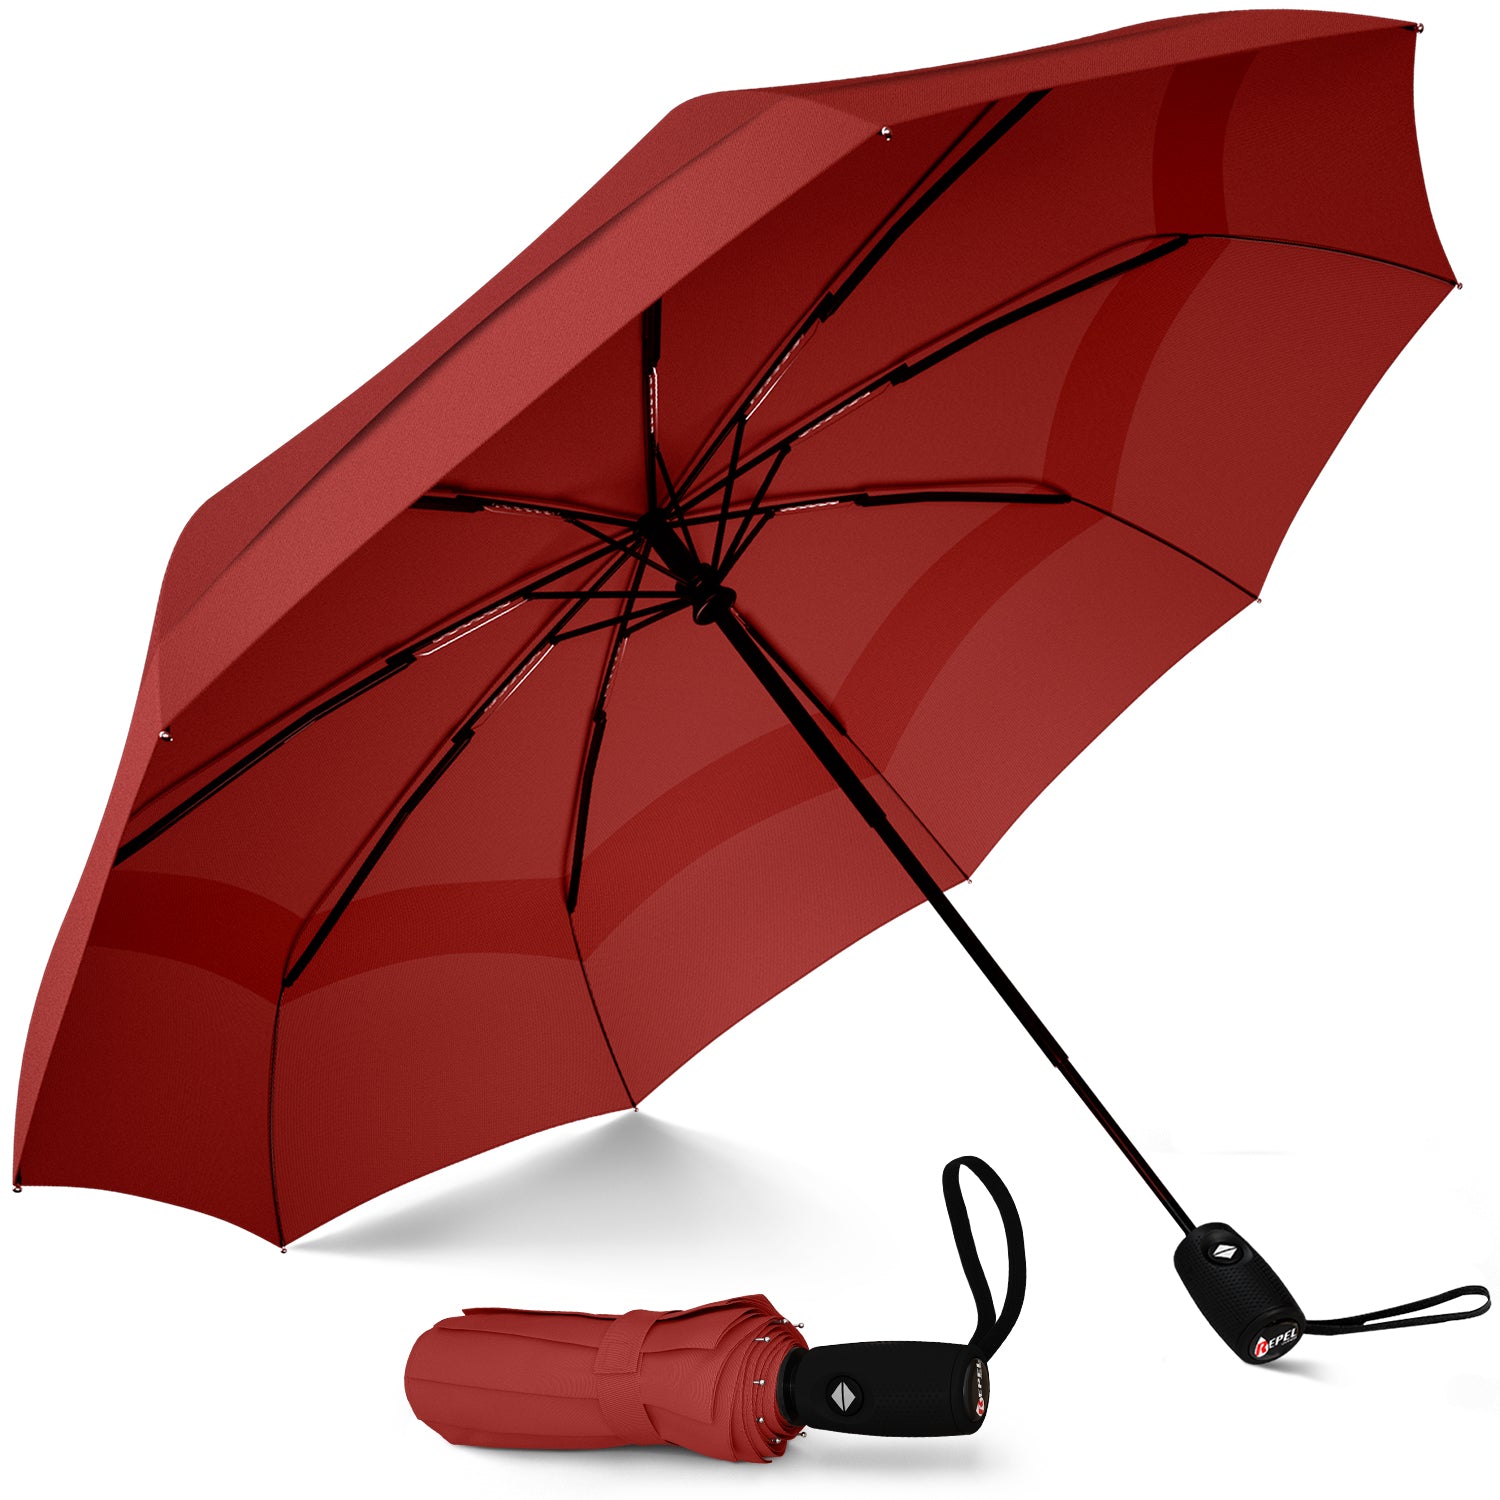 Windproof Travel Umbrella - Compact, Automatic, Red